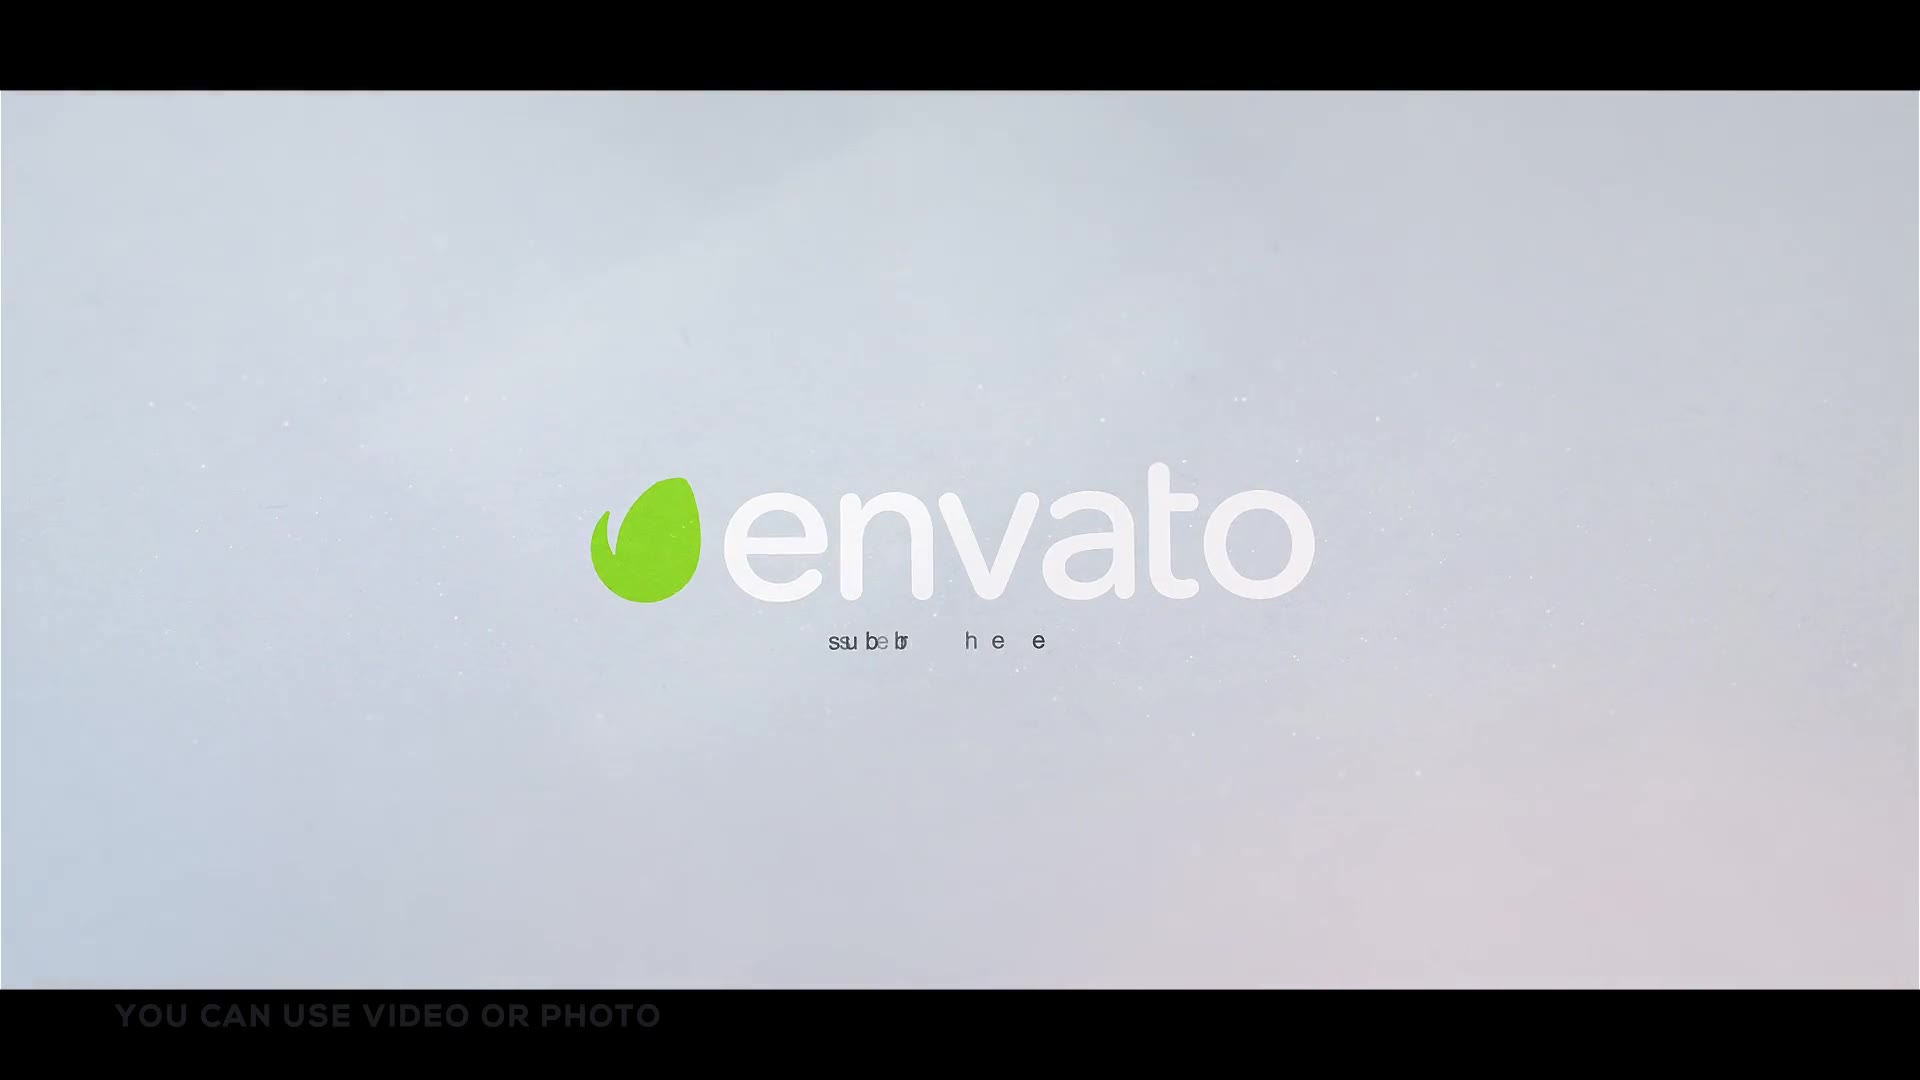 Drop Ink Logo Reveal - Download Videohive 20741198